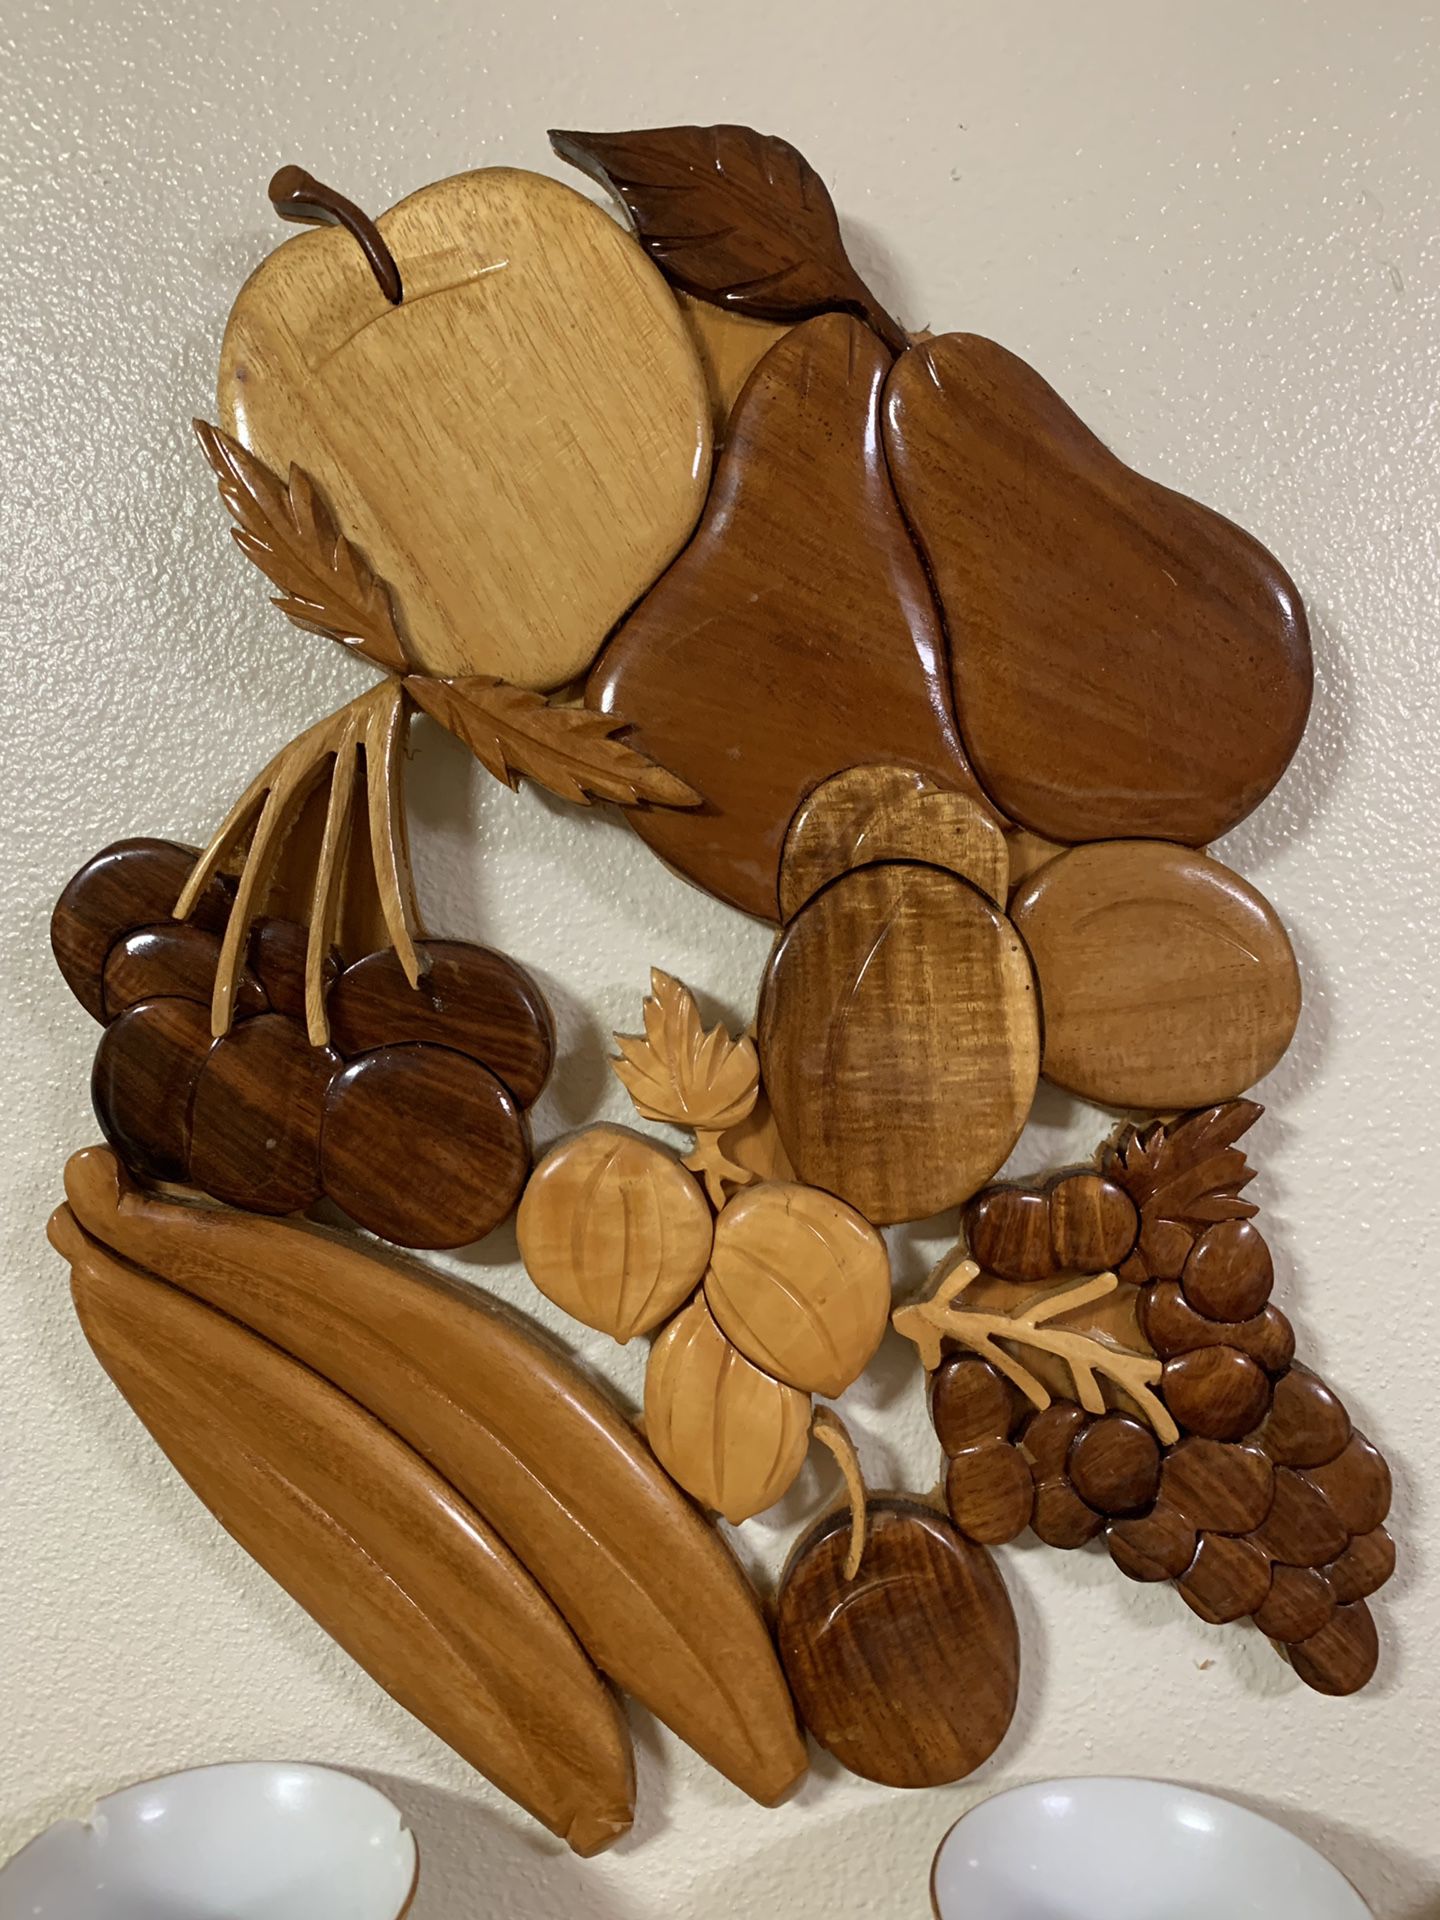 Carved wood wall decor for kitchen .